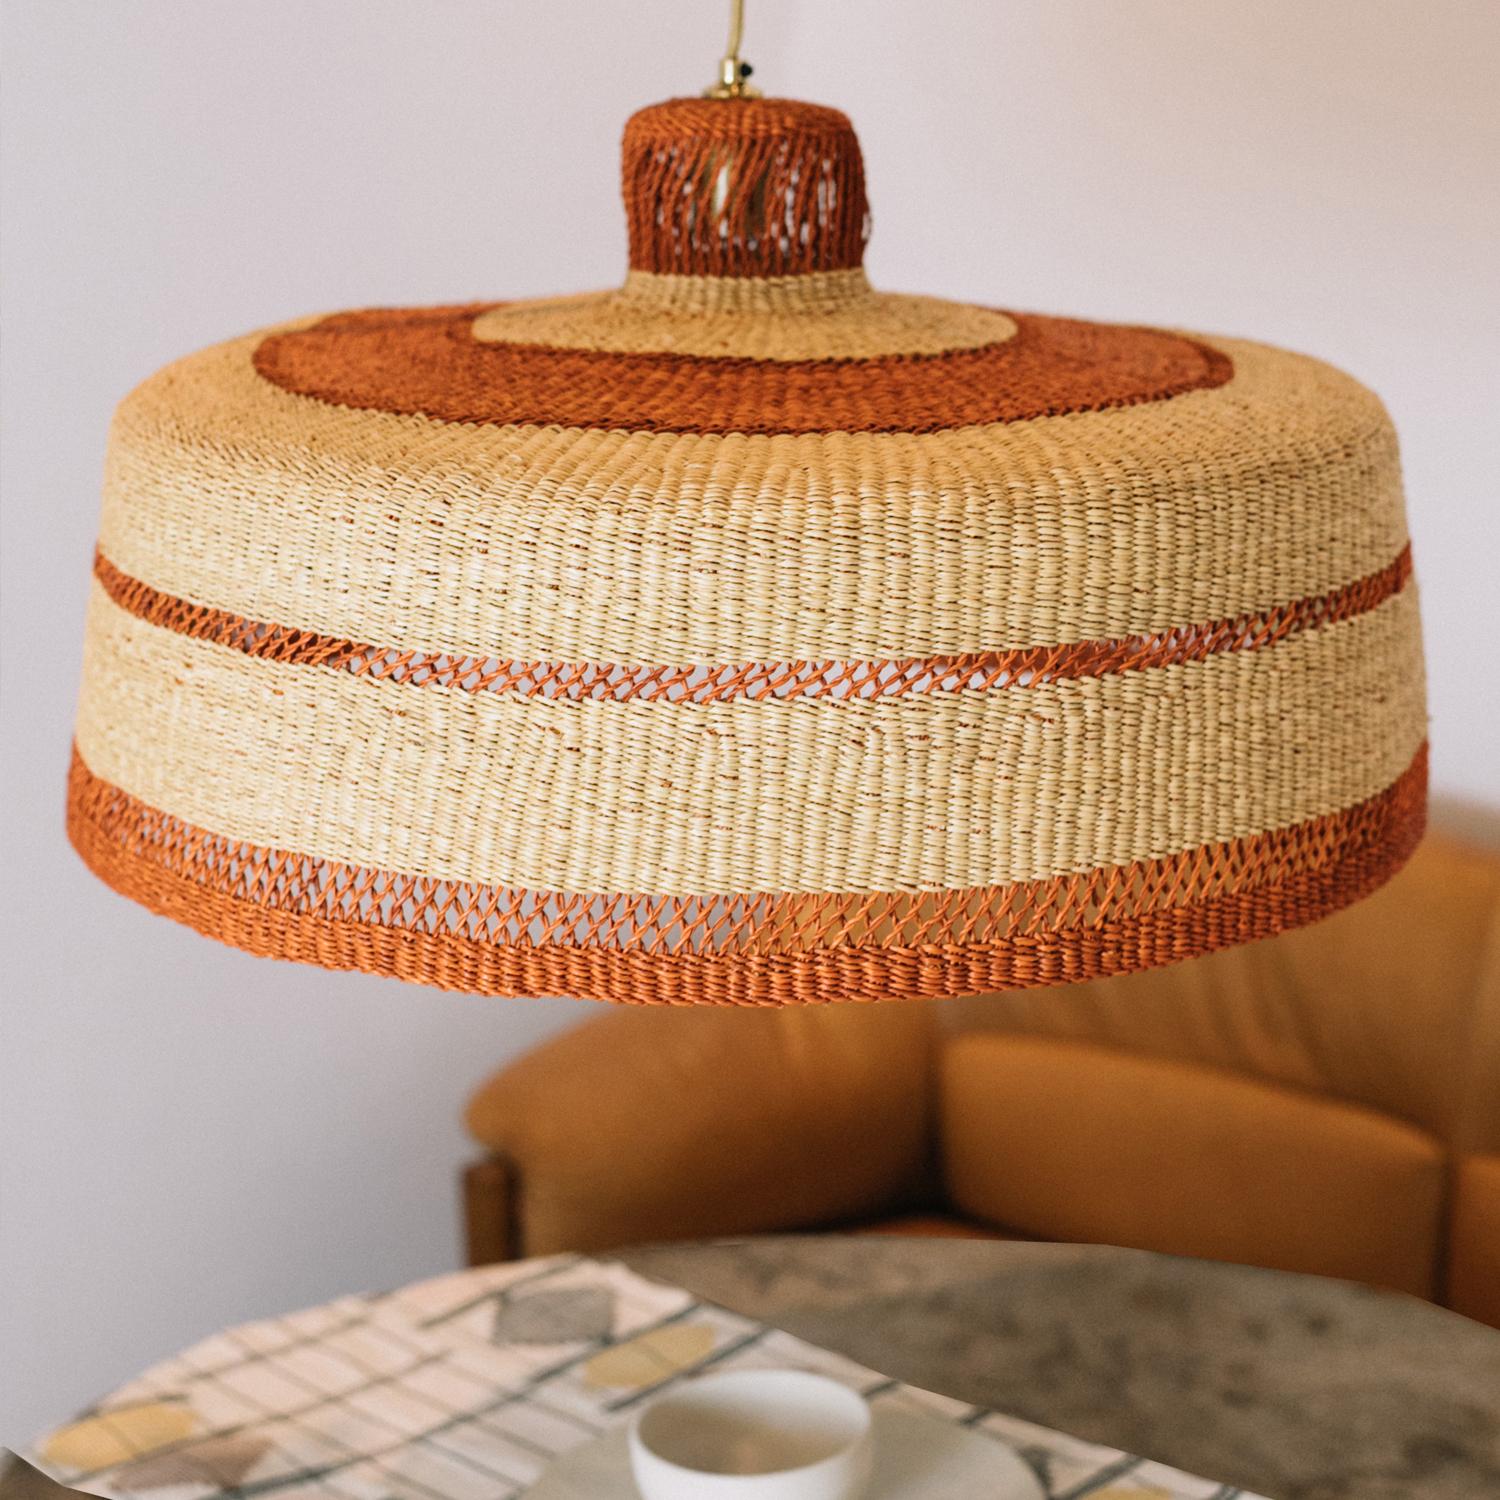 Large woven pendant lamp DEEPLY XL: 
Naturally elegant
Colour: Natural and ginger (terracotta)

Characteristics: 
The lamp is sold ready to hang with : 
*1.9 meters of cloth covered cable, colour Gold; 
*Gold lamp holder ; 
*Ceiling Rose in brushed